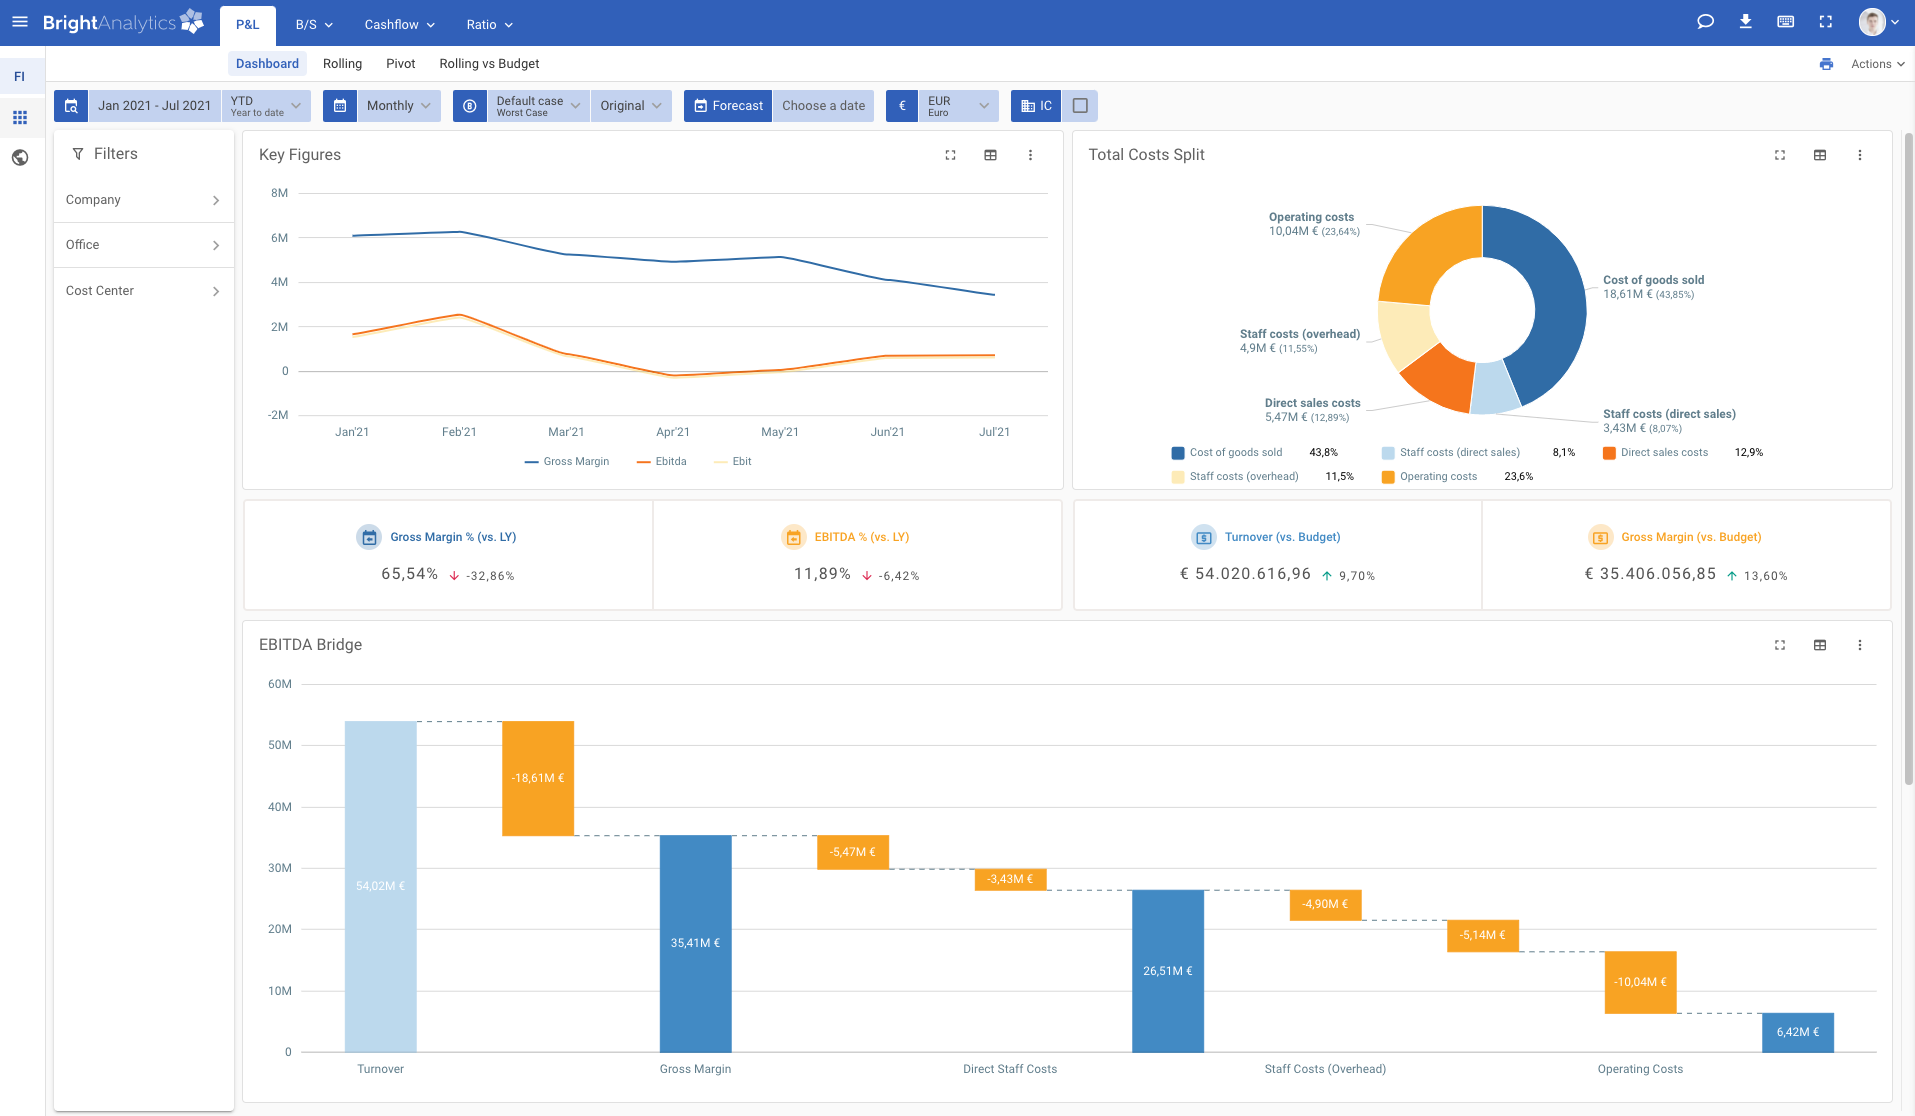 Tabella alternative - Intuitive and user-friendly interface of BrightAnalytics